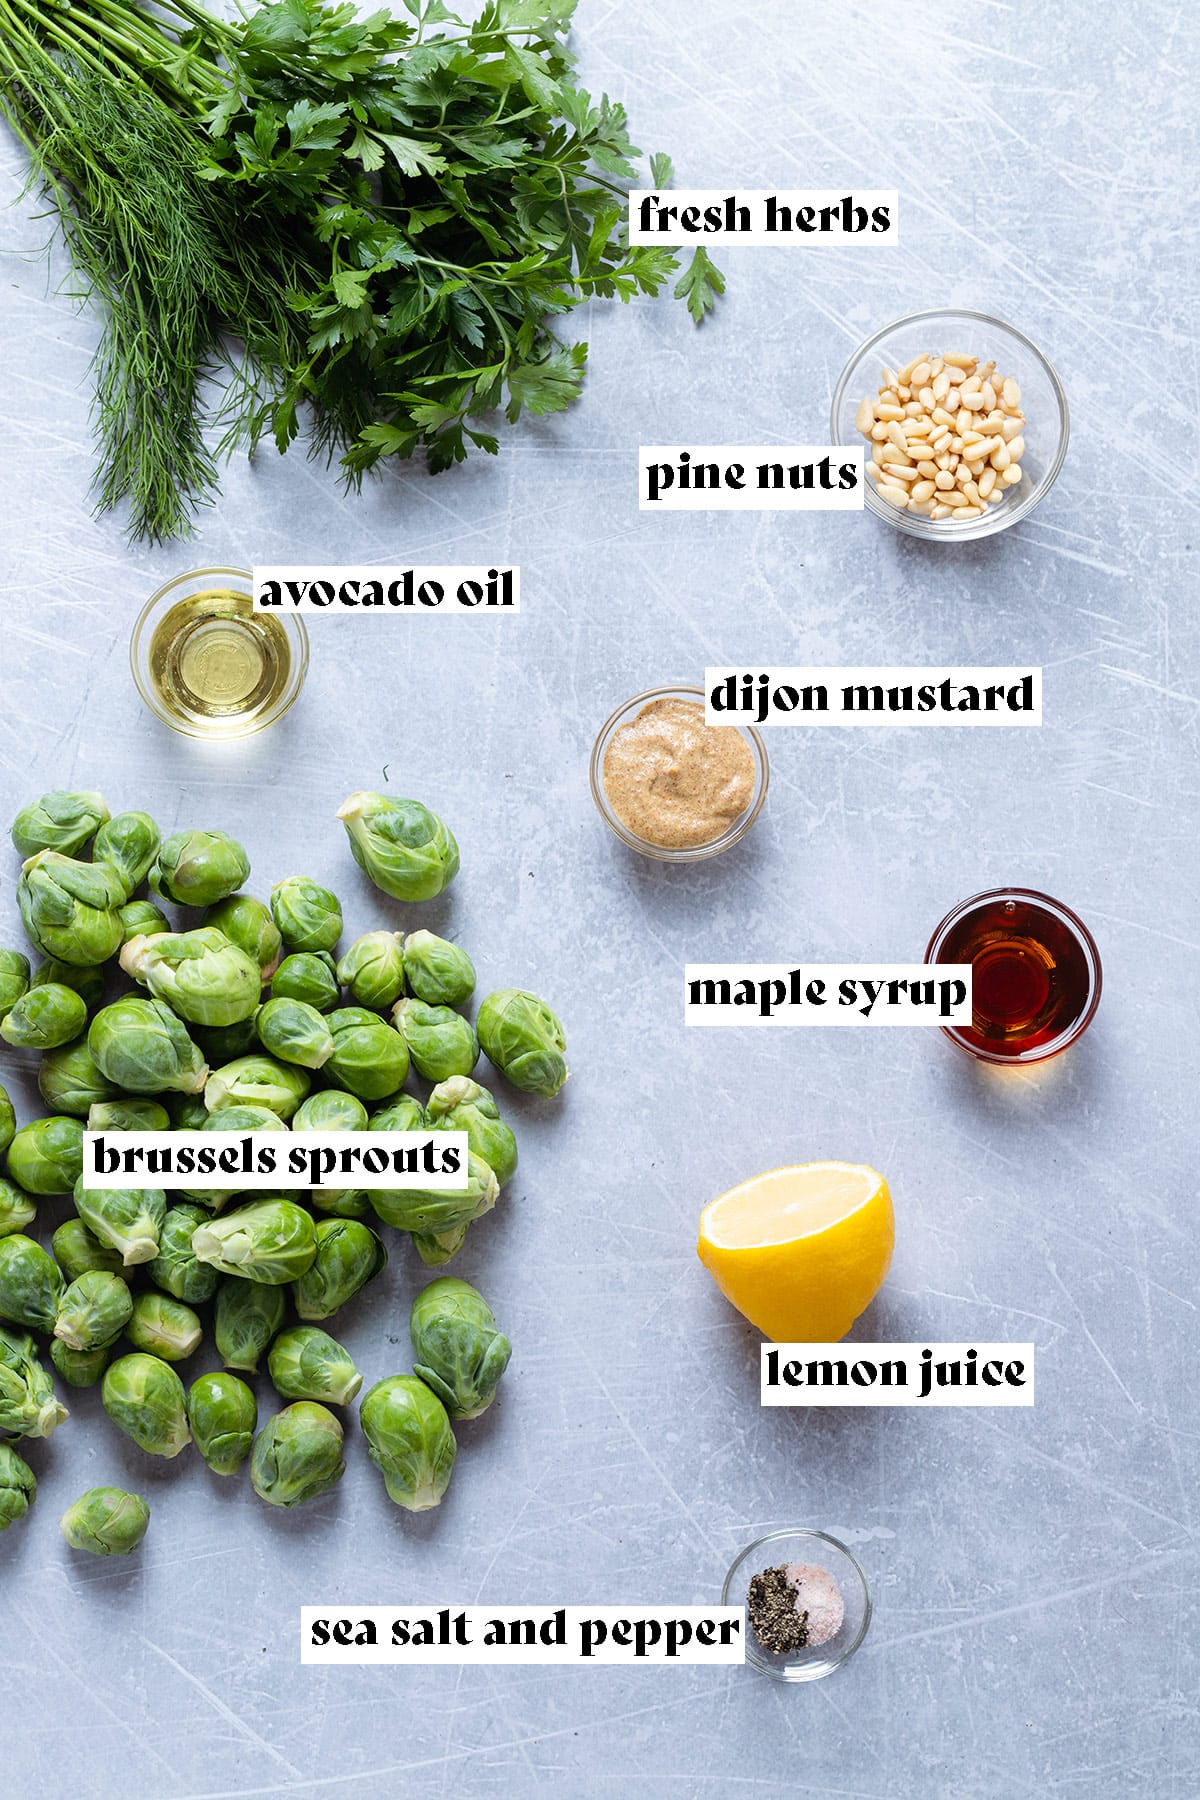 Raw brussels sprouts, fresh herbs, pine nuts, and other ingredients laid out on a grey background.